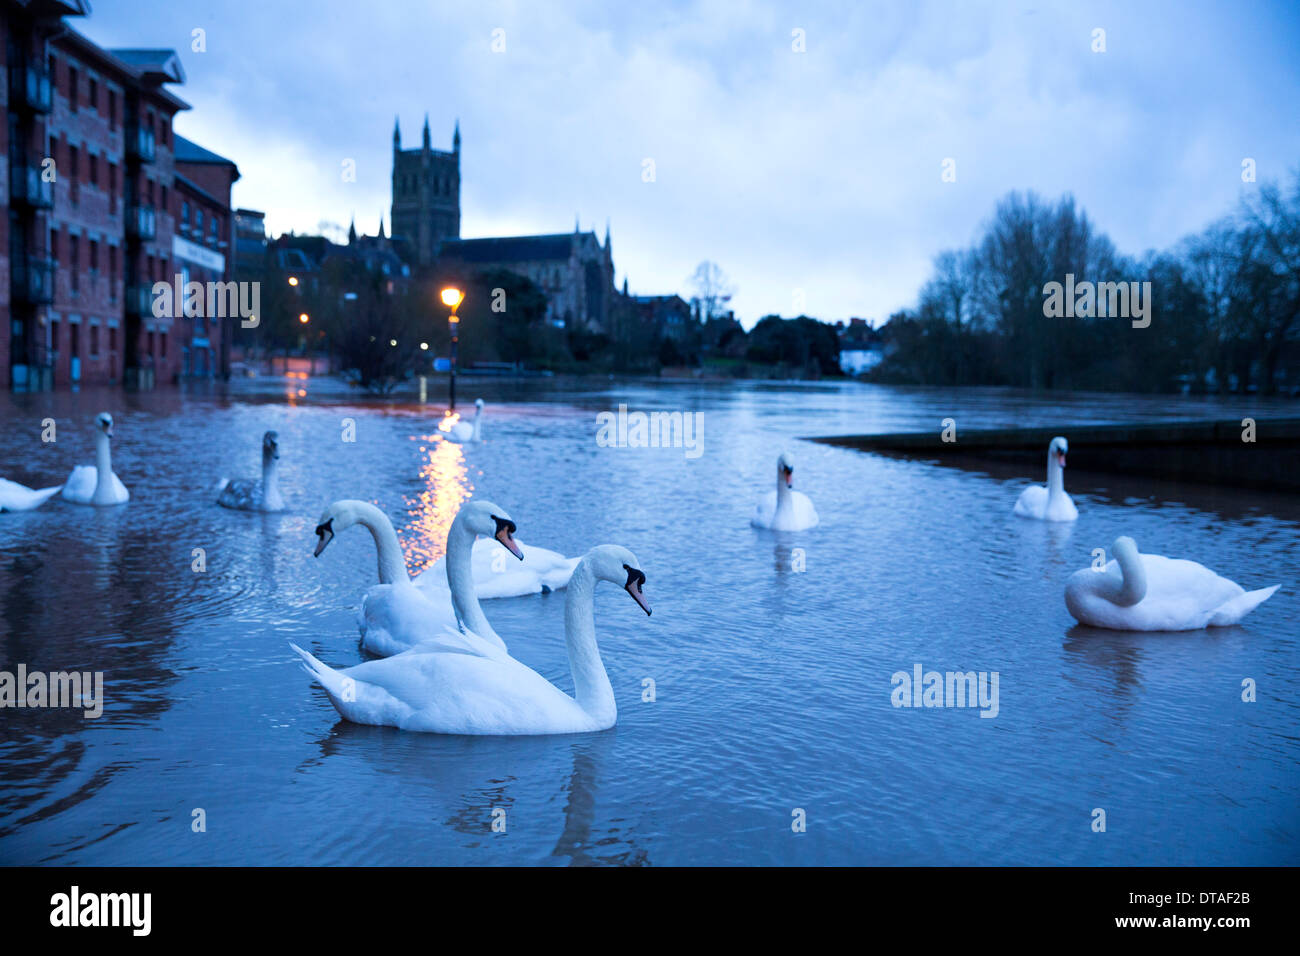 Worcester City Centre around the River Severn area showing the floods. Swans swimming on the river side photographed at dawn. Stock Photo